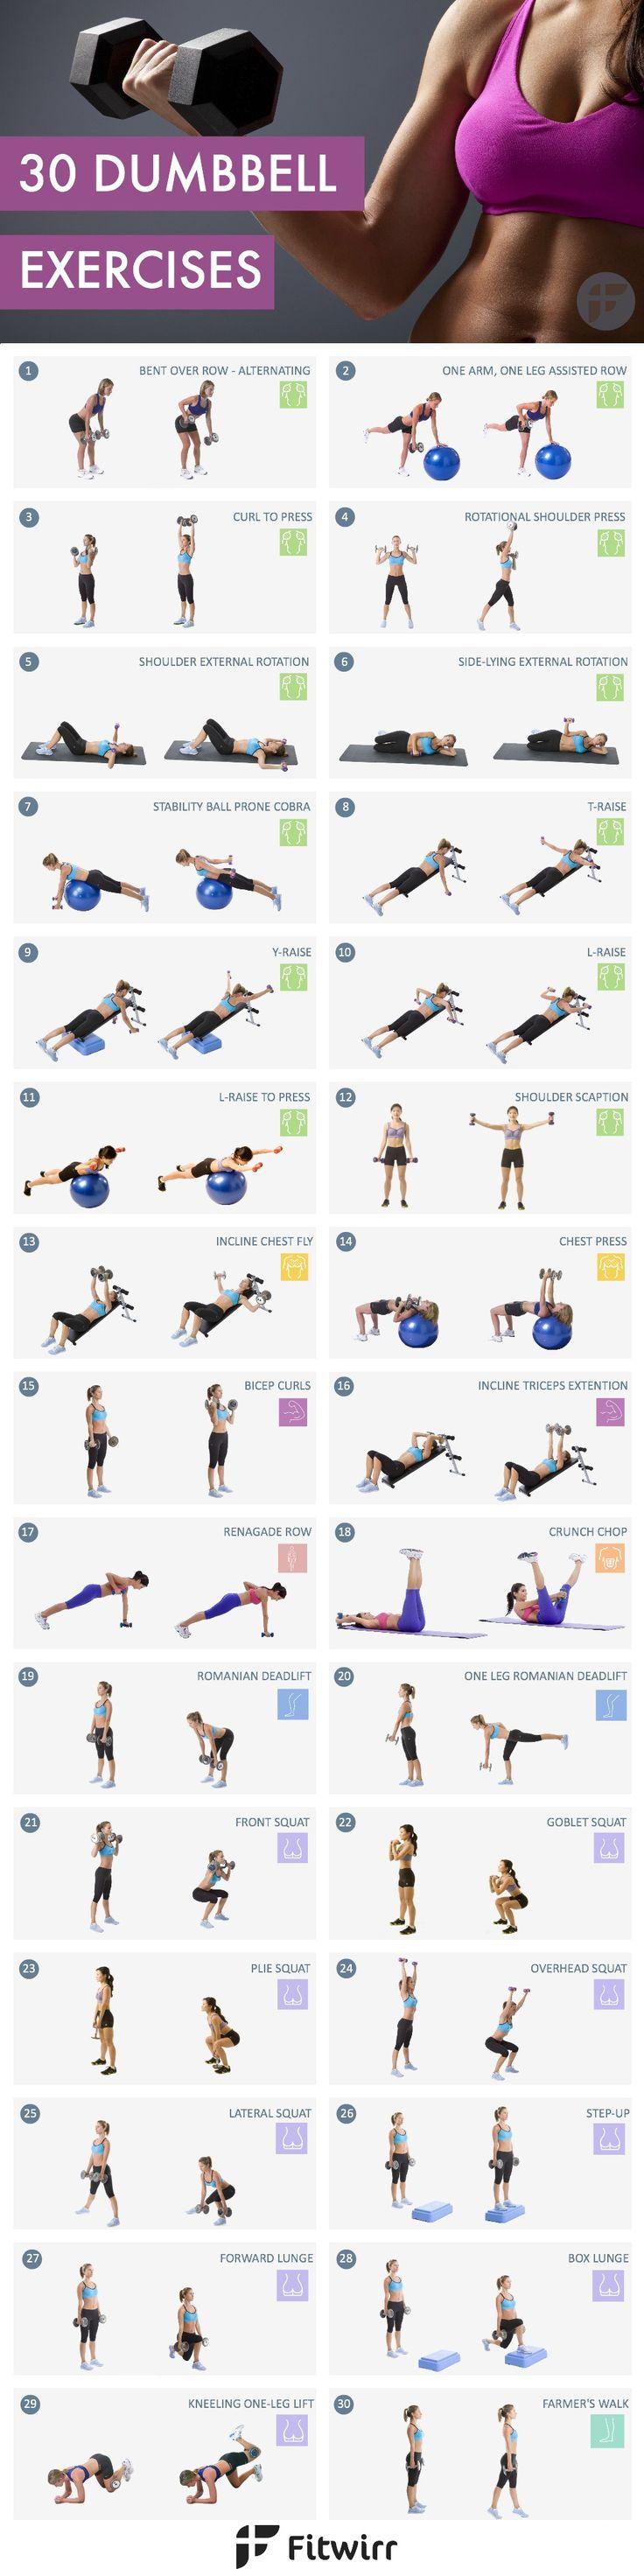 Mariage - Home Workouts: 30 Dumbbell Exercises For Women [Image List]